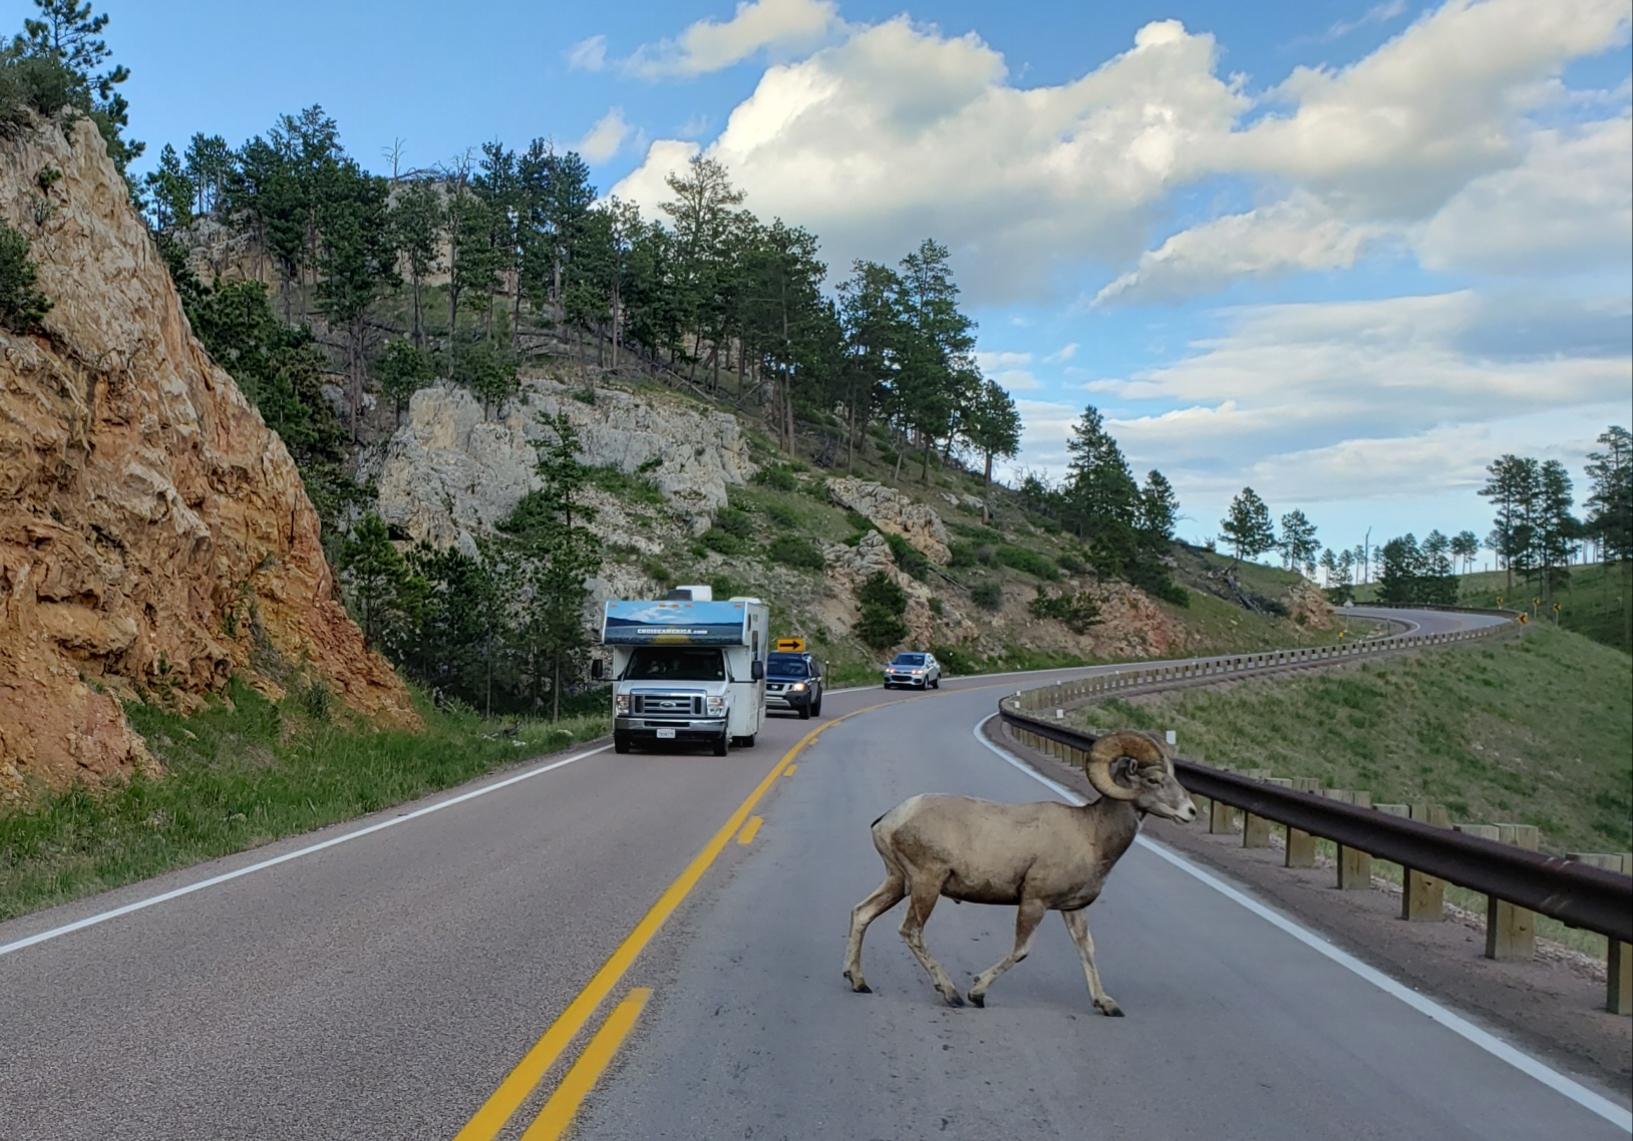 A bighorn sheep ram stands in the highway, with a camper stopped in the other lane.